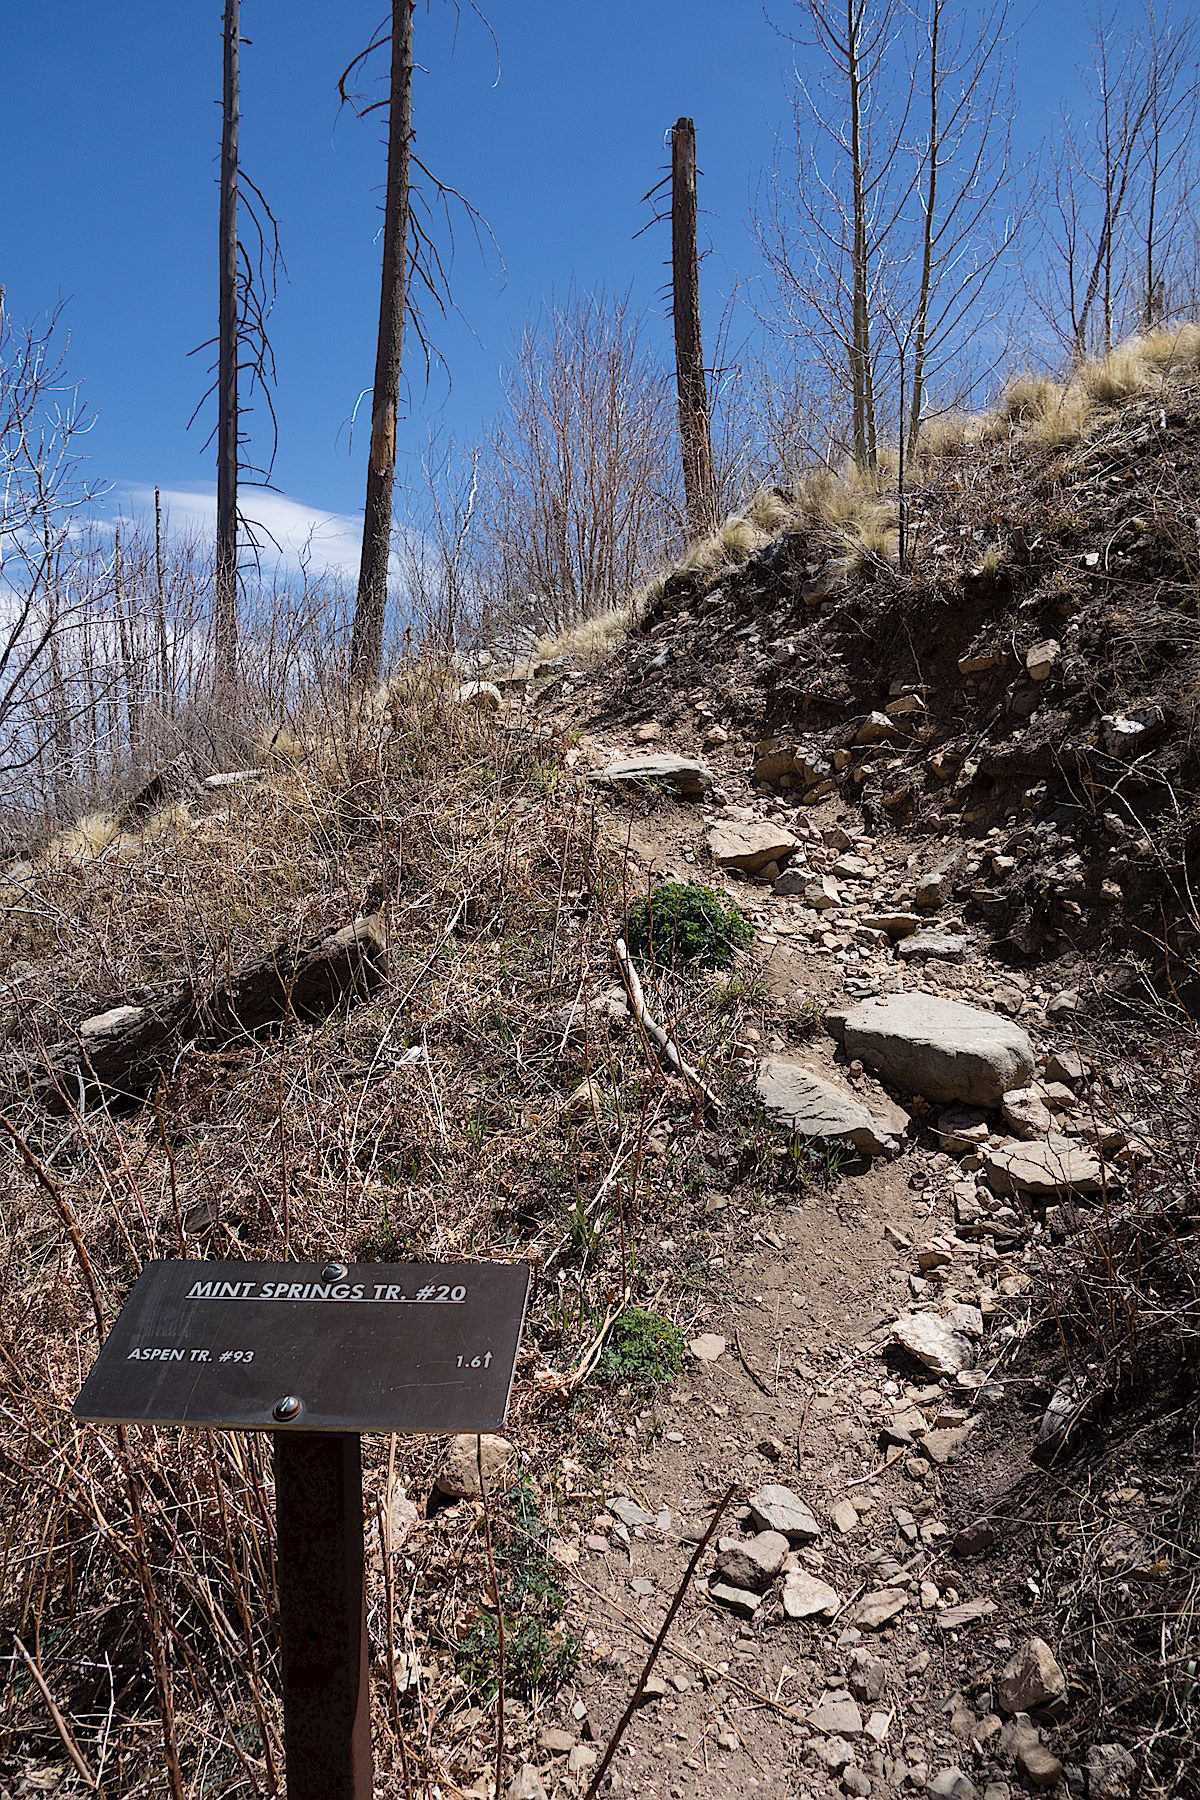 Small trail sign near the start of the trail. April 2014.